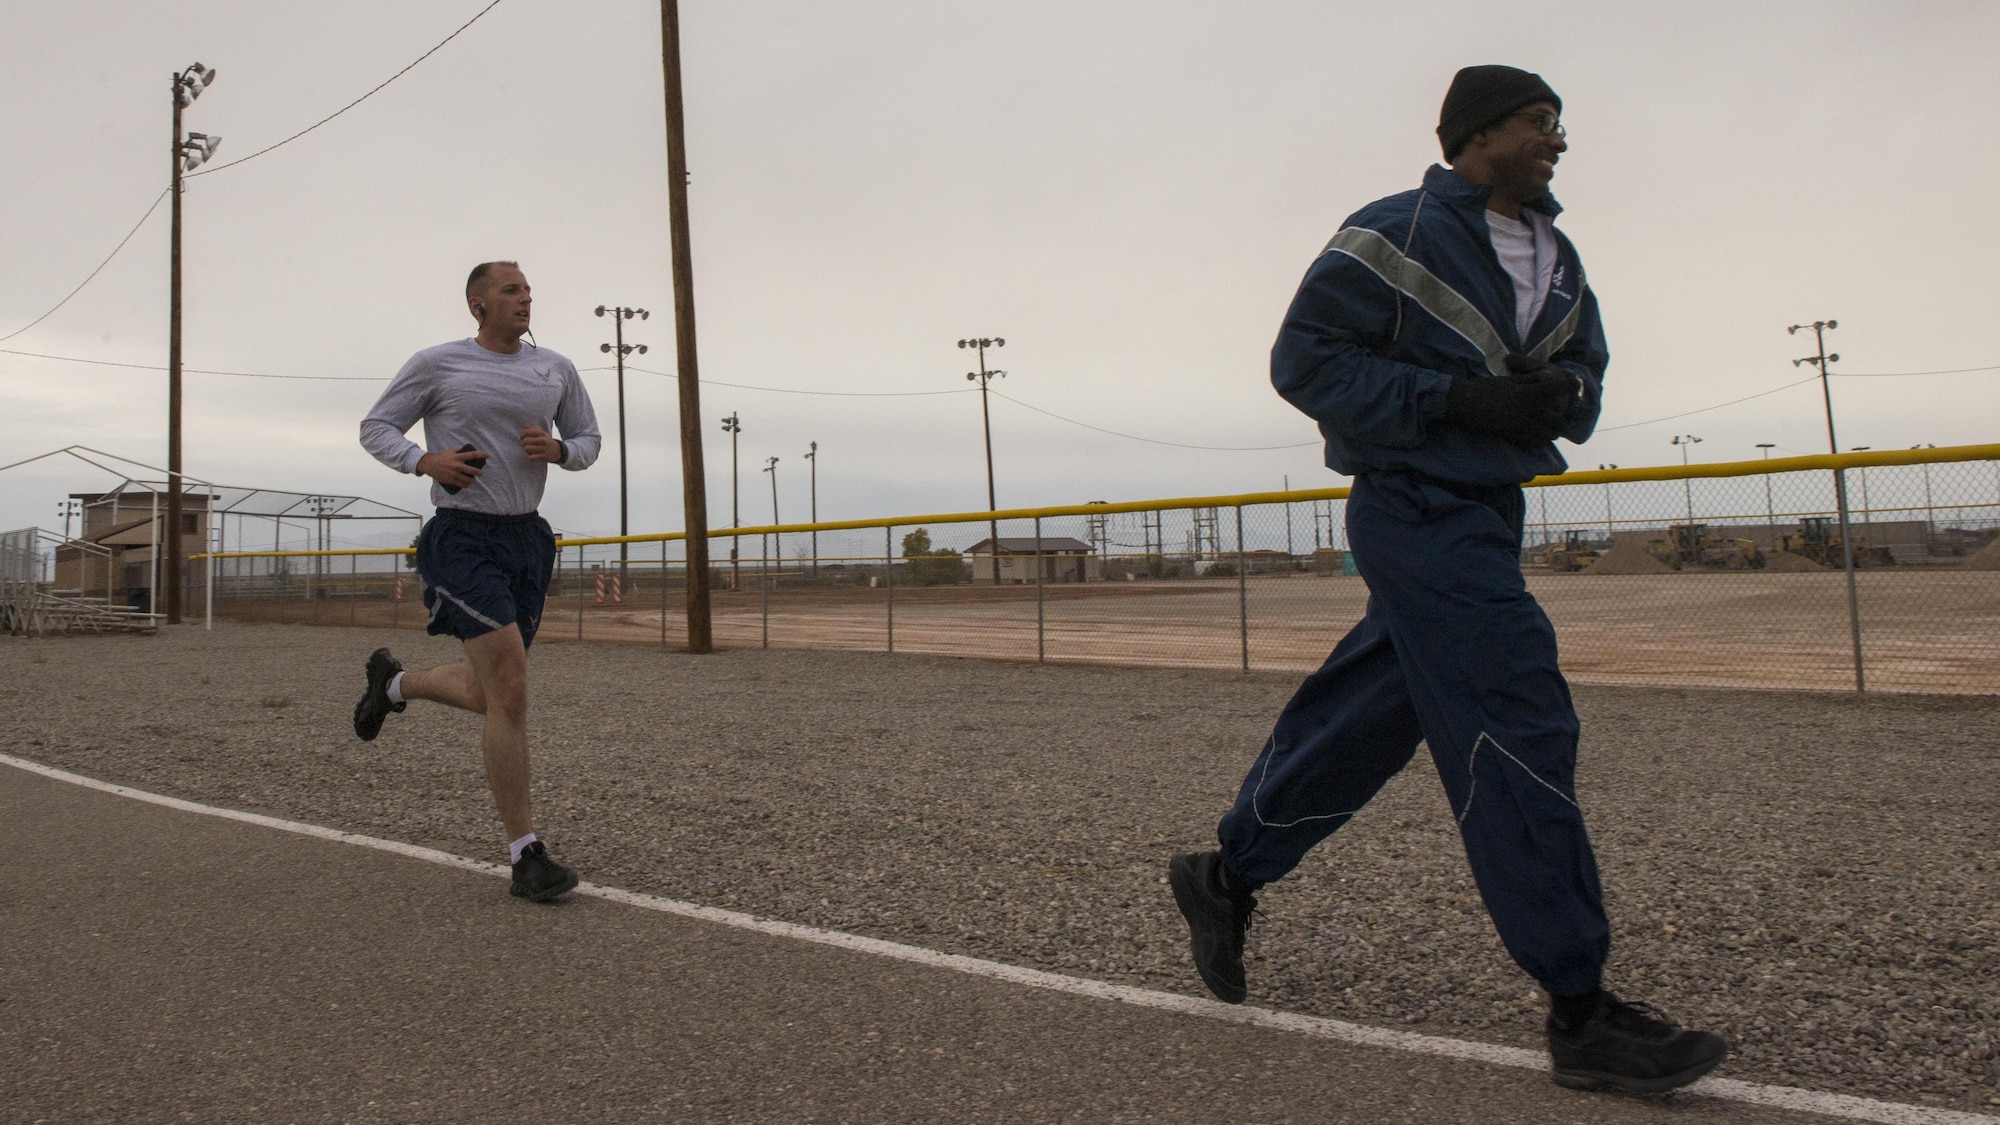 Two Airmen round a corner while racing in the 49th Force Support Squadron’s annual Turkey Trot on Nov. 21, 2016 at Holloman Air Force Base, N.M. Participants raced against the clock to compete for a variety of prizes, ranging from a frozen turkey to a $25 gift card. (U.S. Air Force photo by Airman 1st Class Alexis P. Docherty) 